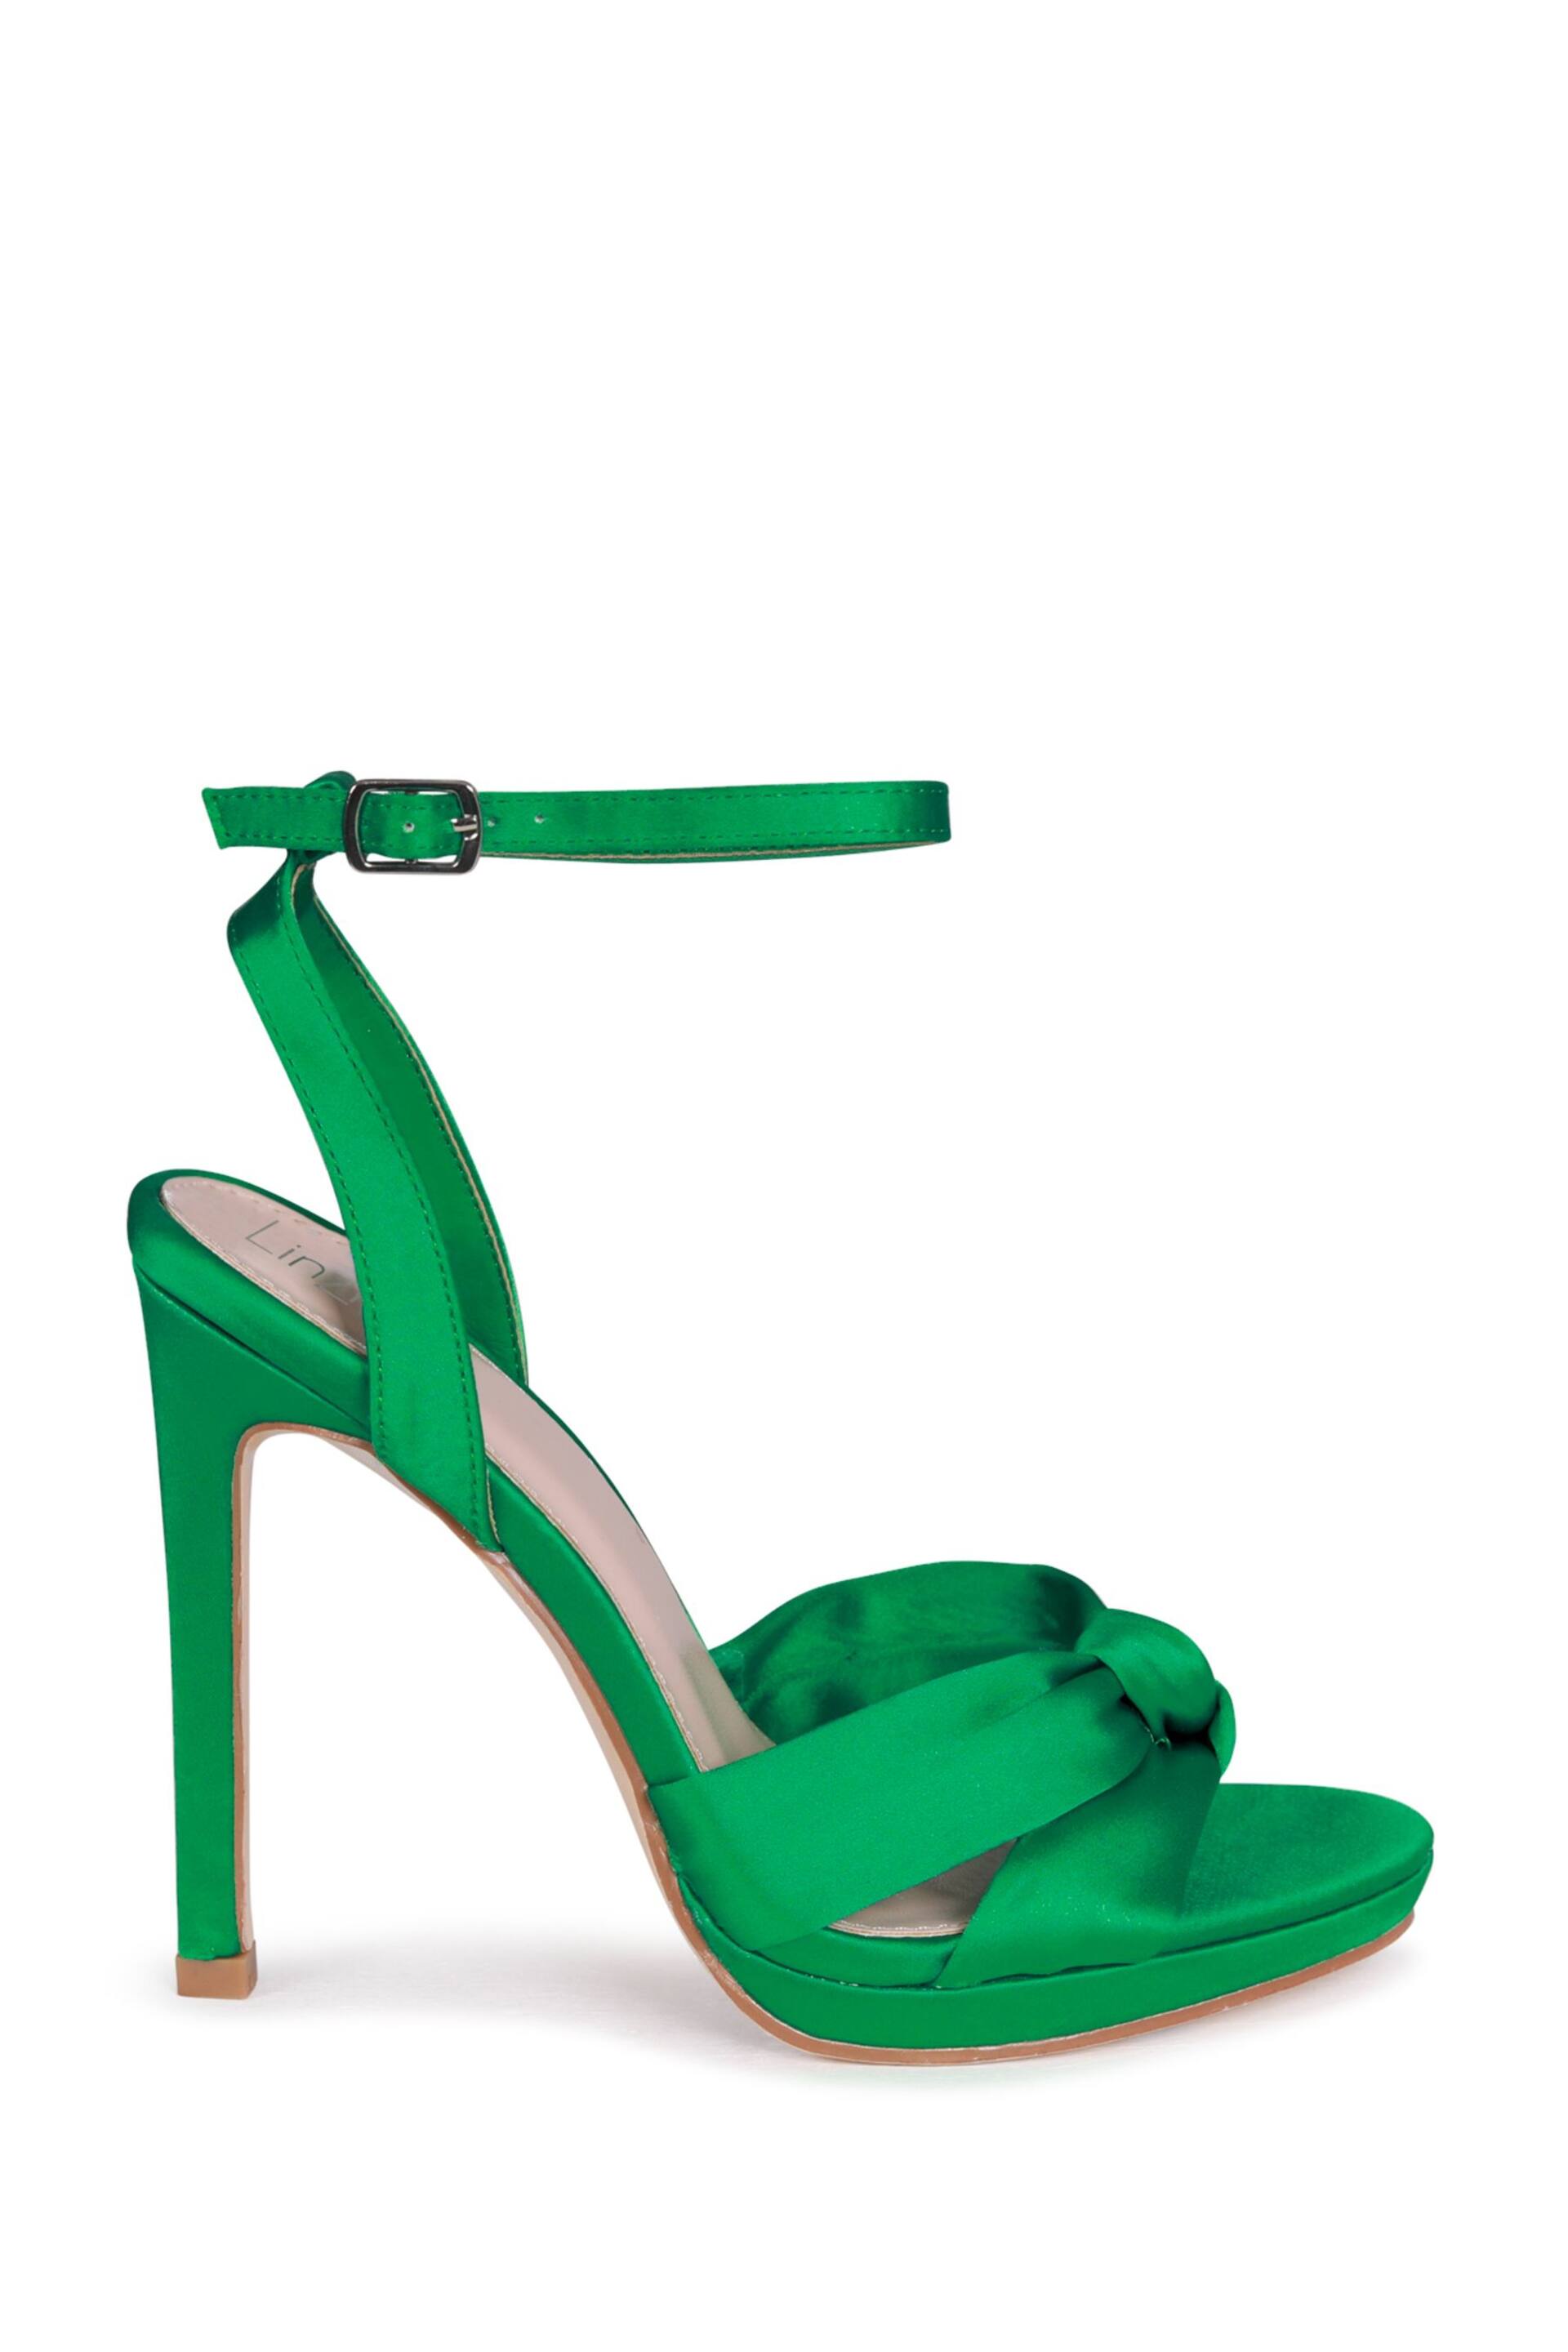 Linzi Green Galaxy Stiletto Platform Heels With Knotted Front Straps - Image 2 of 4